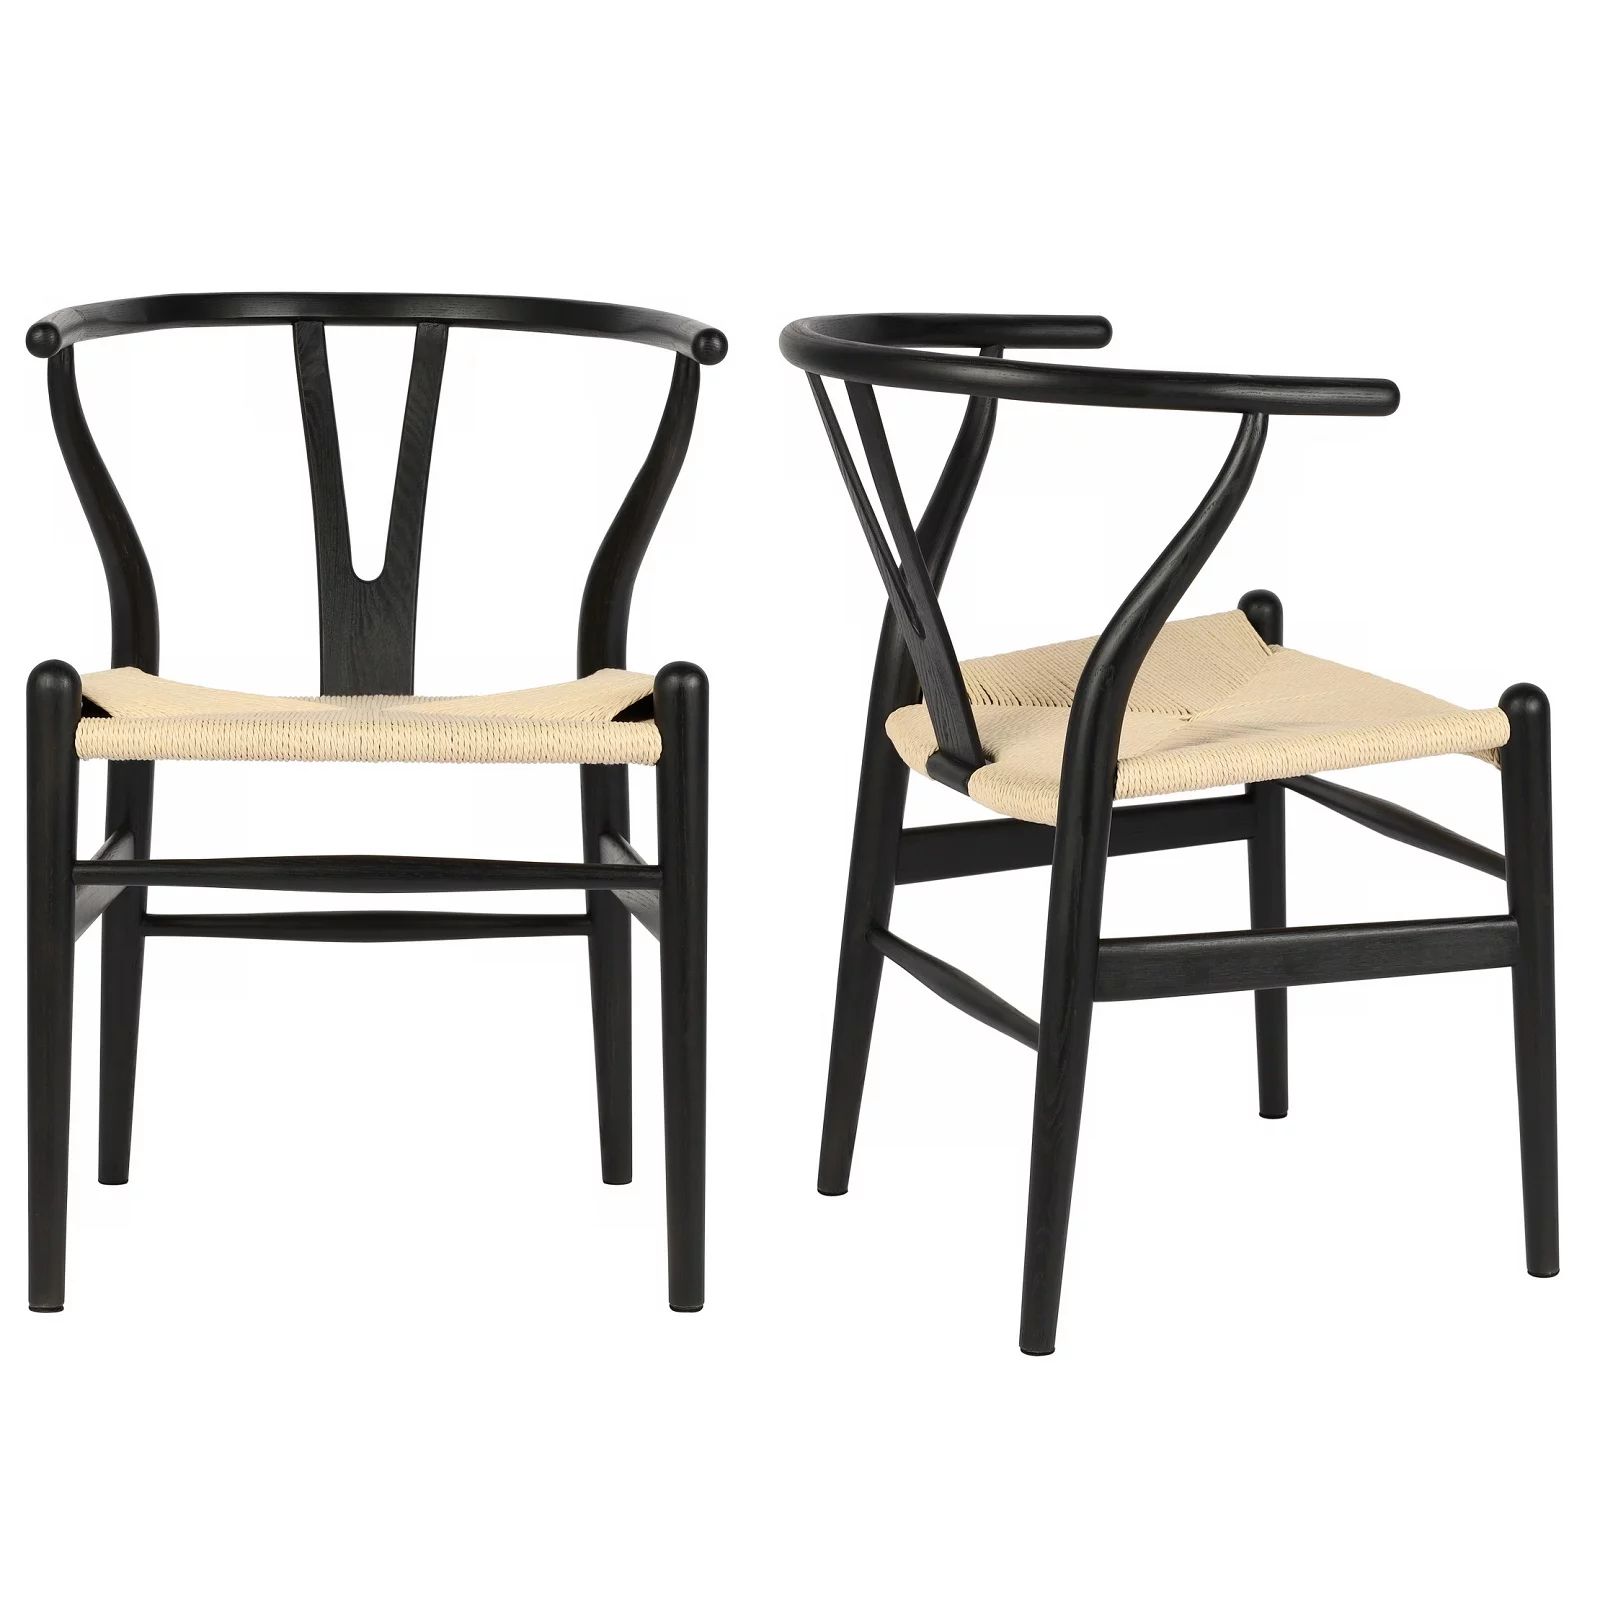 Tomile Woven Dining Chair Ash Wood Wishbone Chair, set of 2 Natural( black+natural rattan seat) -... | Walmart (US)